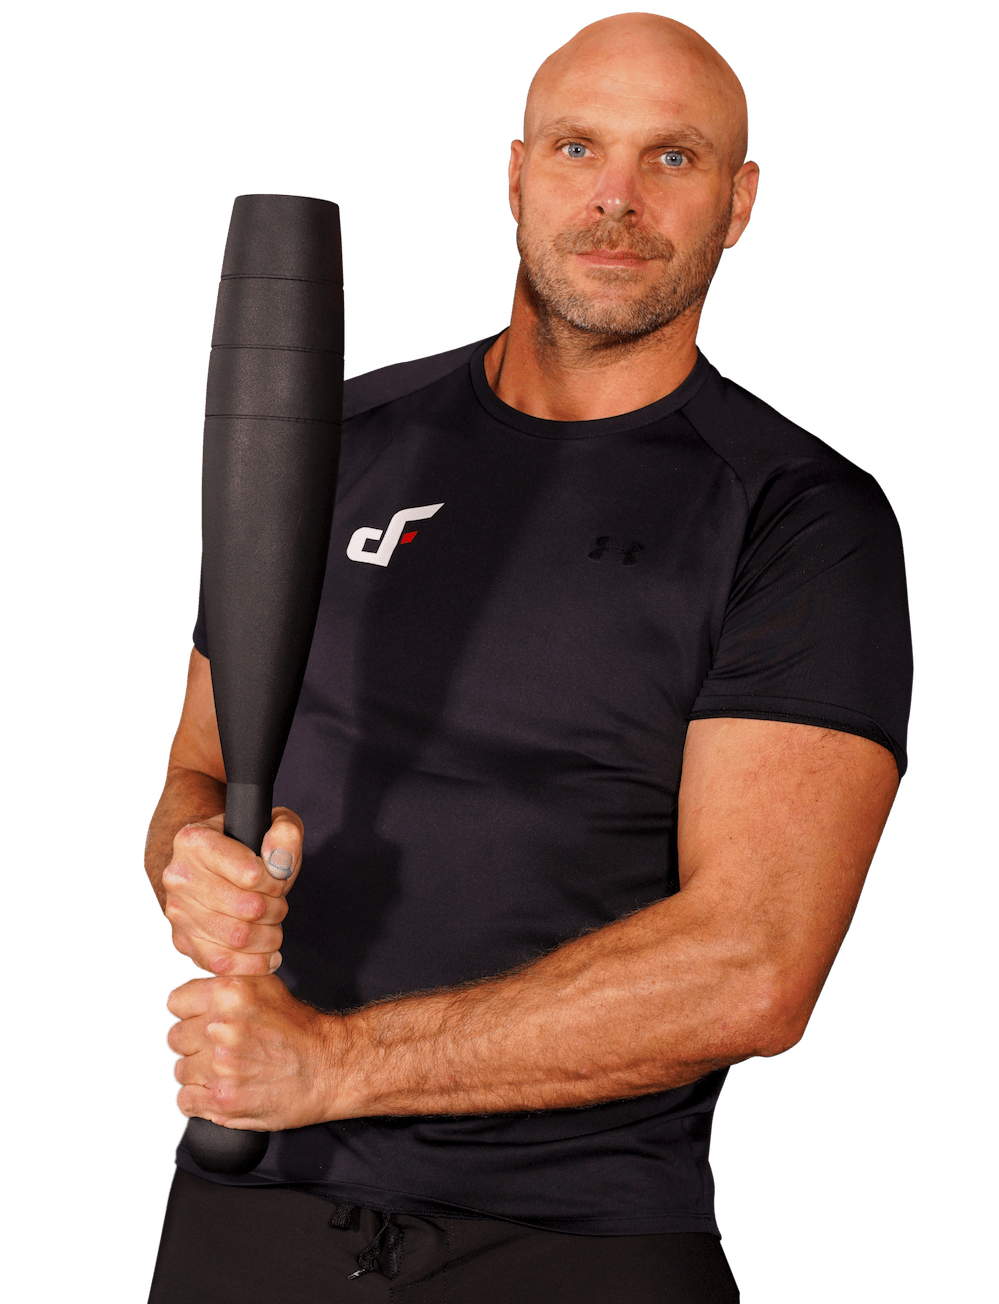 dangerously fit power clubs